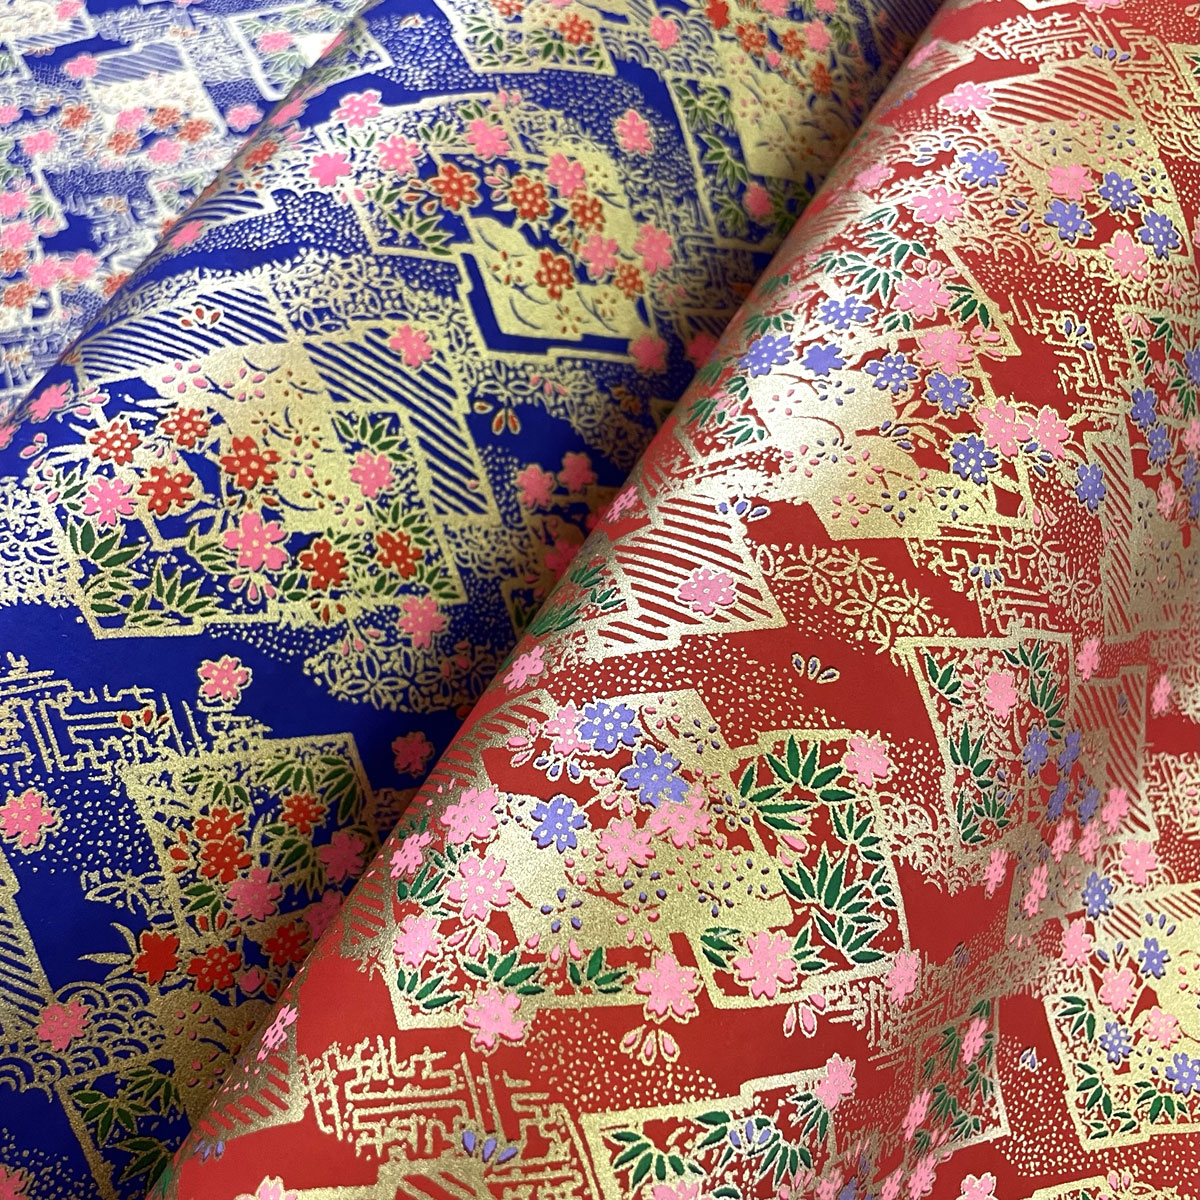  brilliant ... Japanese paper classic pattern . pattern Sakura blue red large size . stamp approximately 63x93cm gaily colored paper 